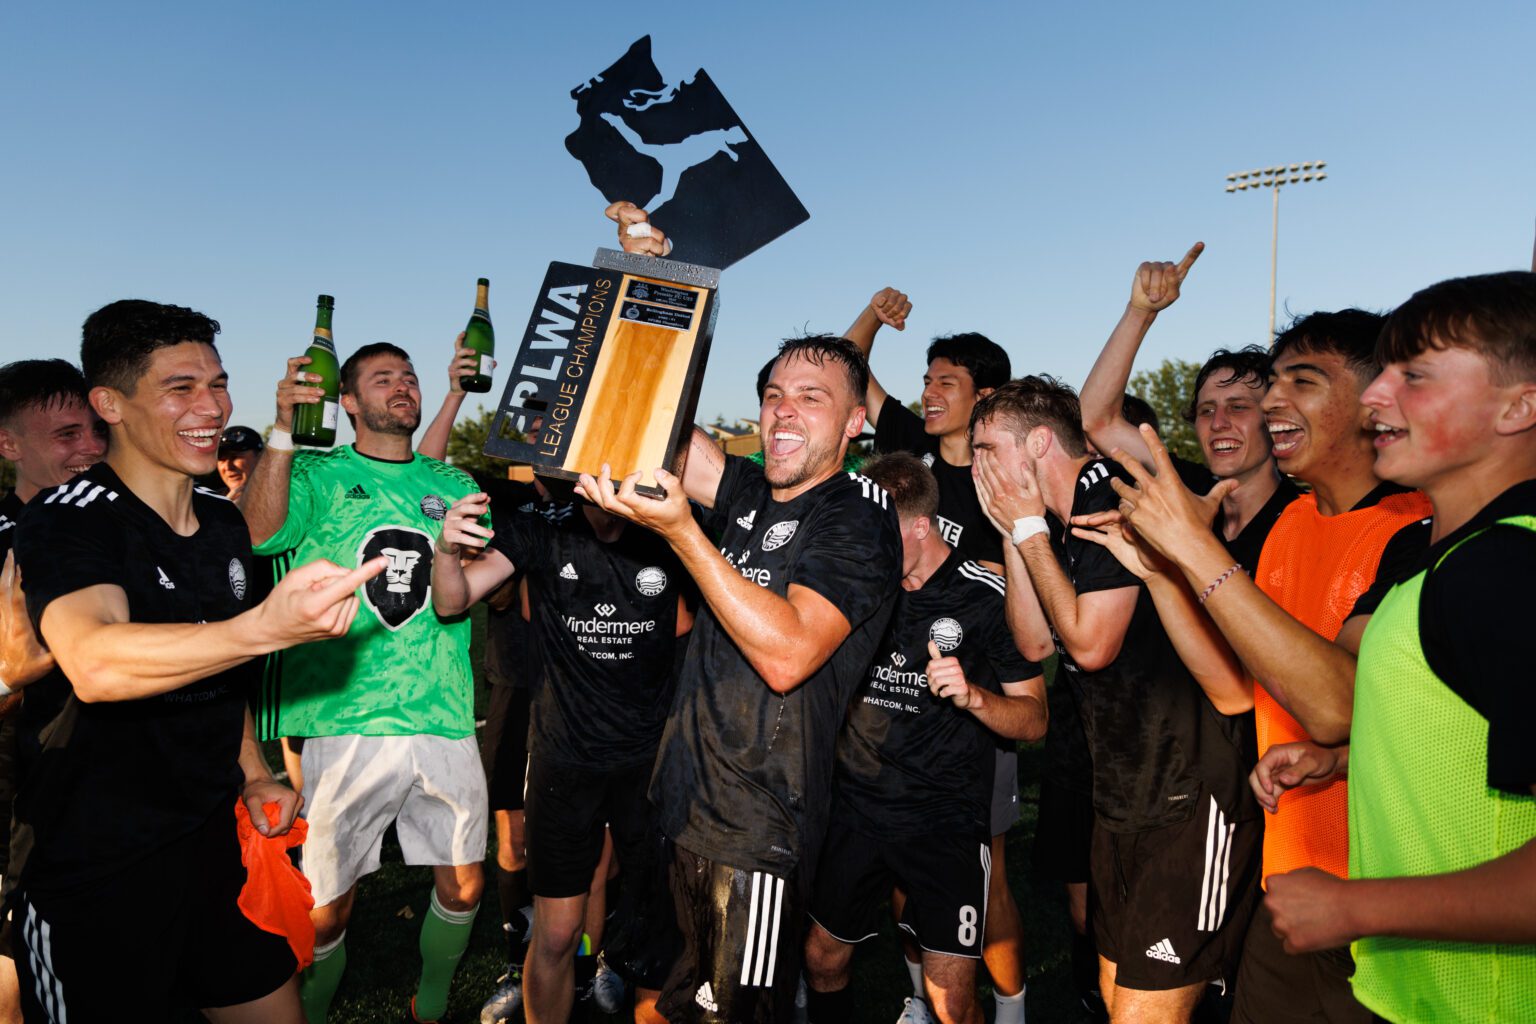 Dylan Langei holds up the trophy as Bellingham United FC celebrates its 3-2 win over Washington Premier in the Evergreen Premier League championship match July 23.